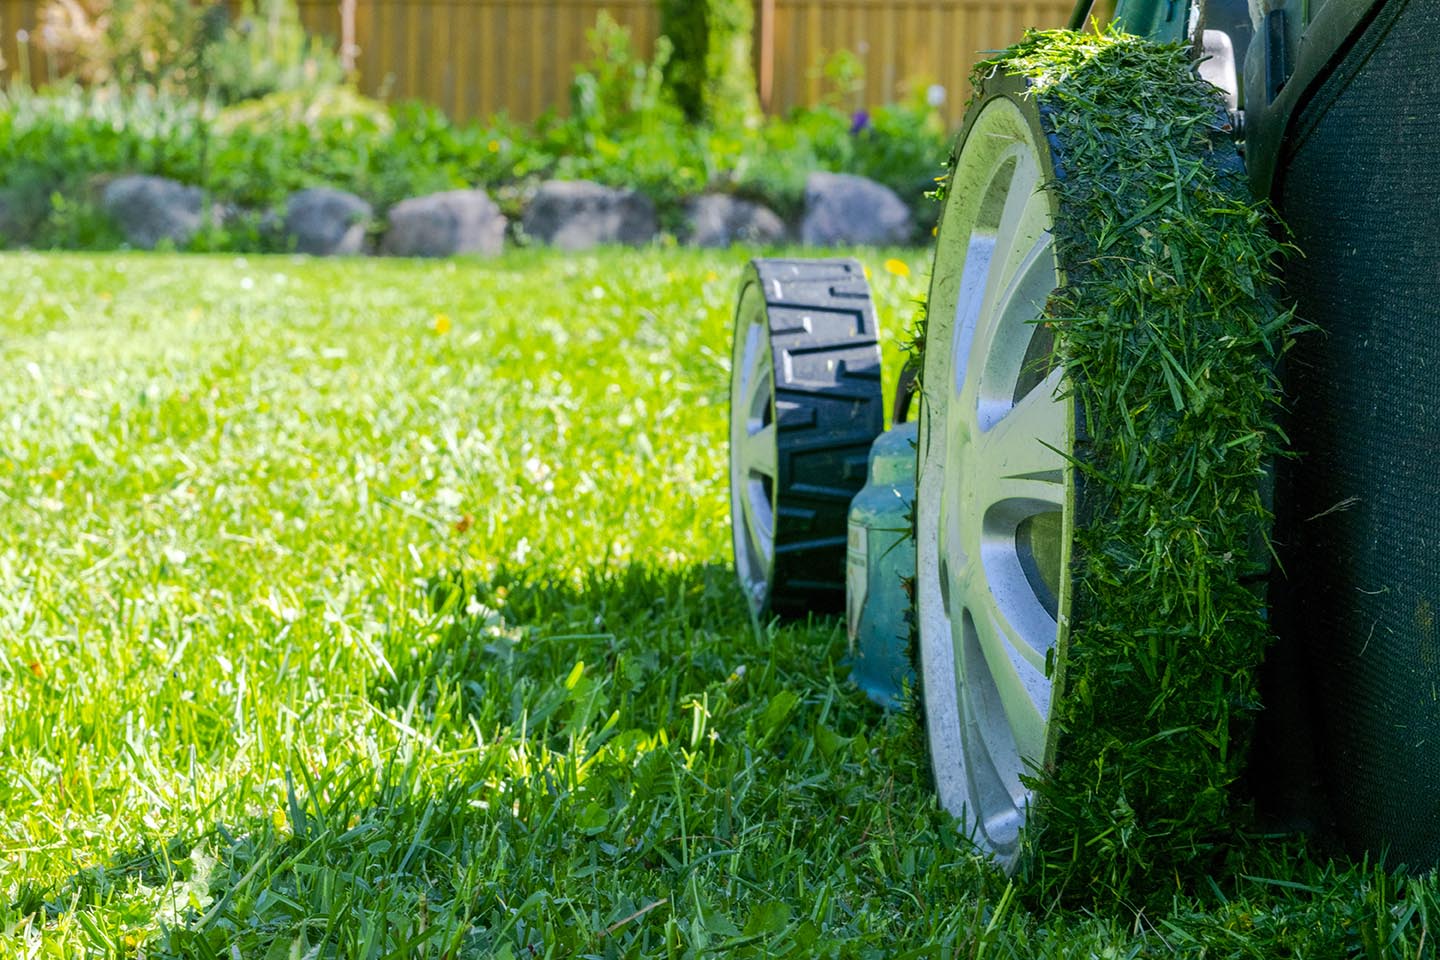 Gardening Services Offered by Lawn Mowing Professionals in Brisbane QLD: